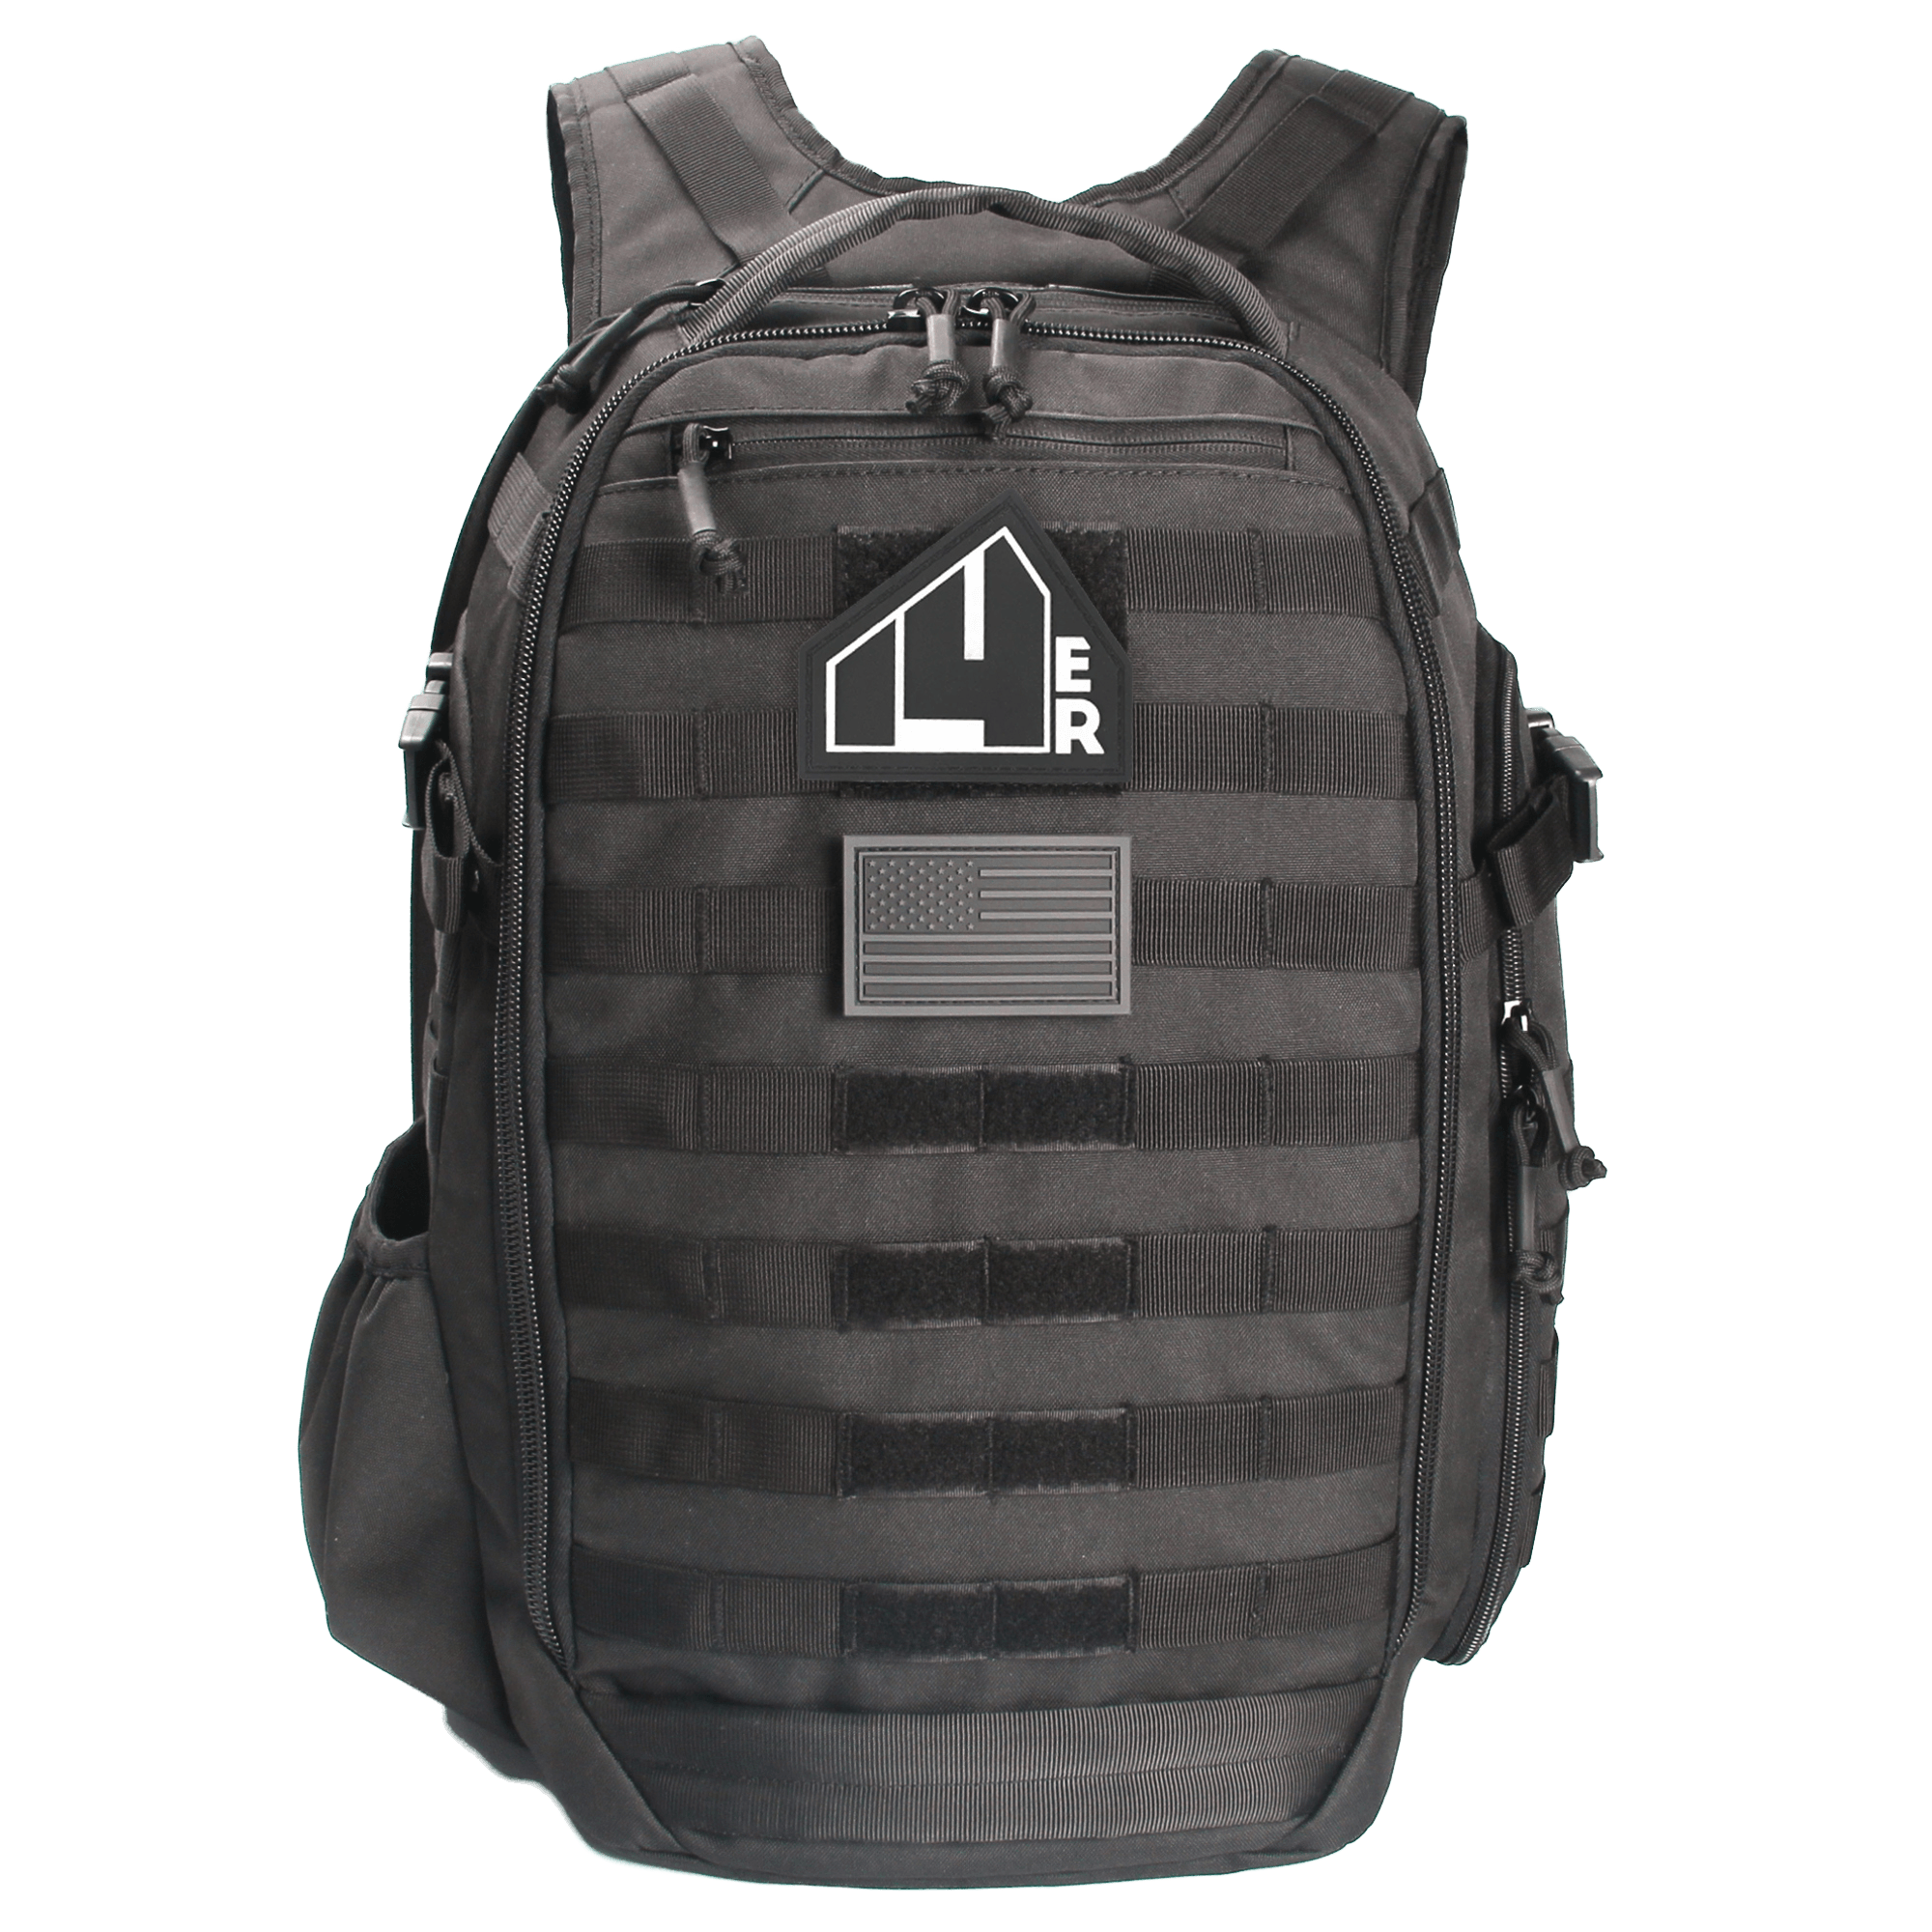 MOLLE System: What is MOLLE, Who Uses It and How Does MOLLE Work? – 14er  Tactical